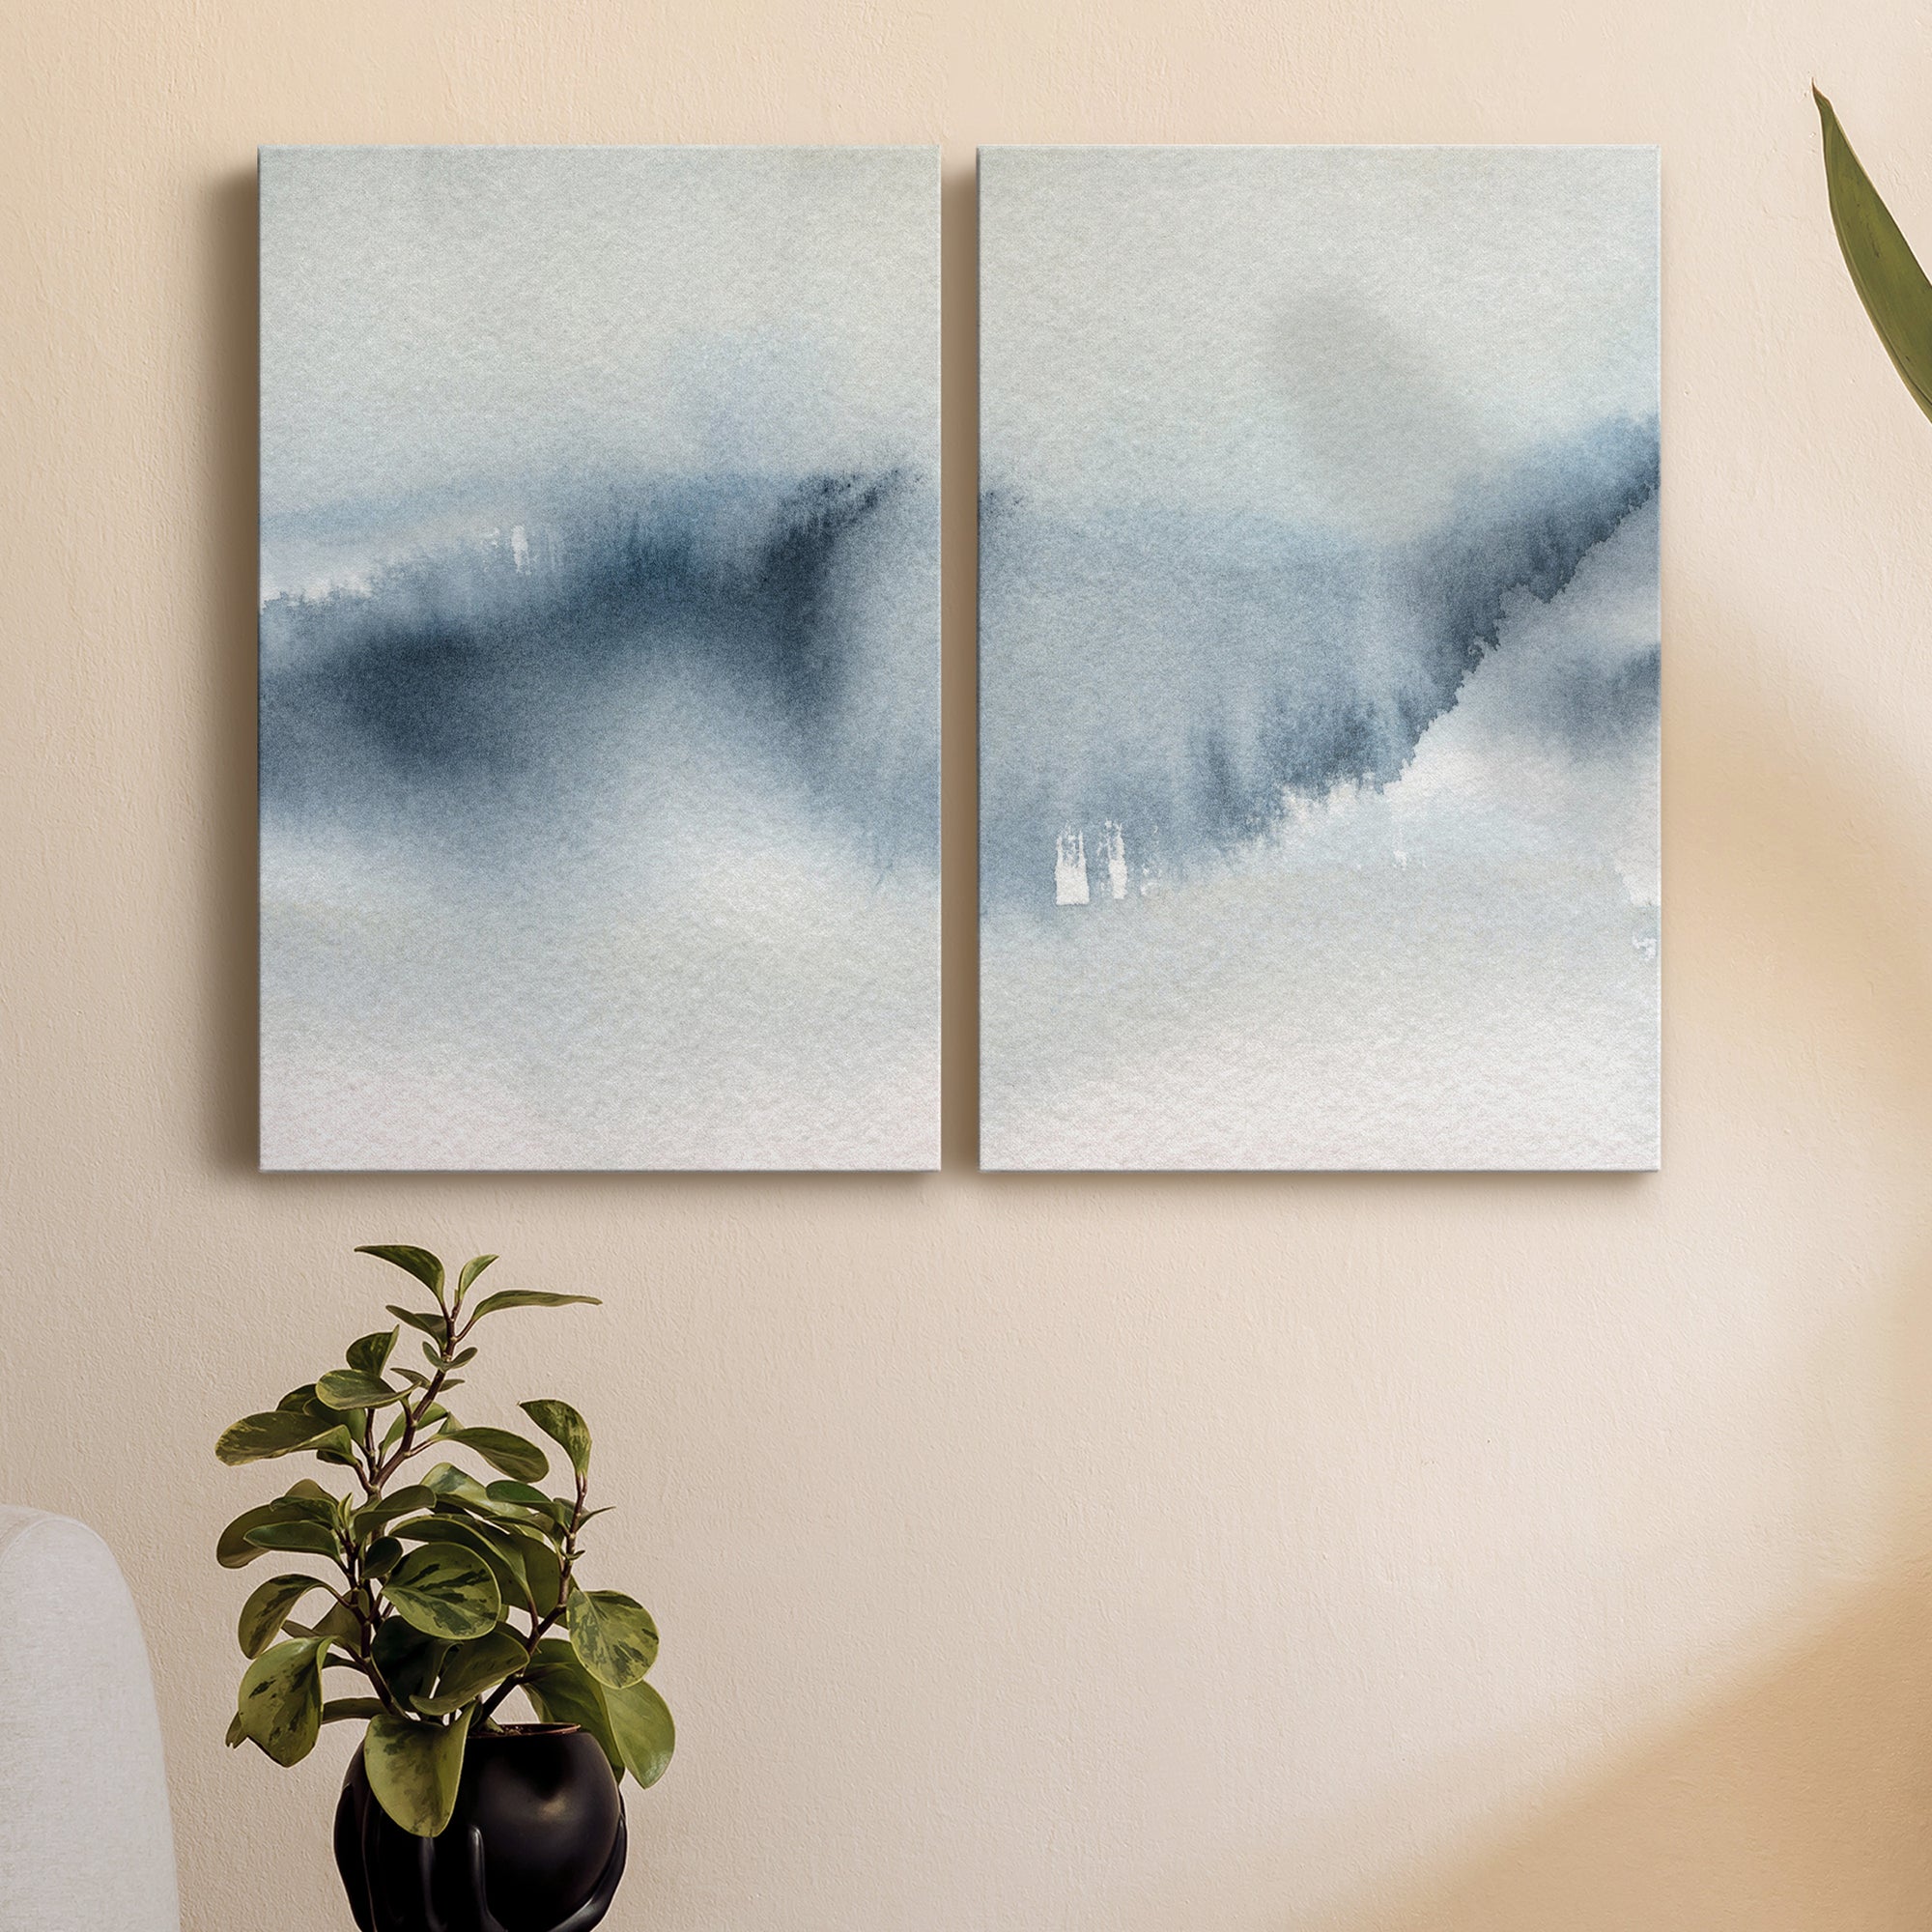 Summer Rain I Premium Gallery Wrapped Canvas - Ready to Hang